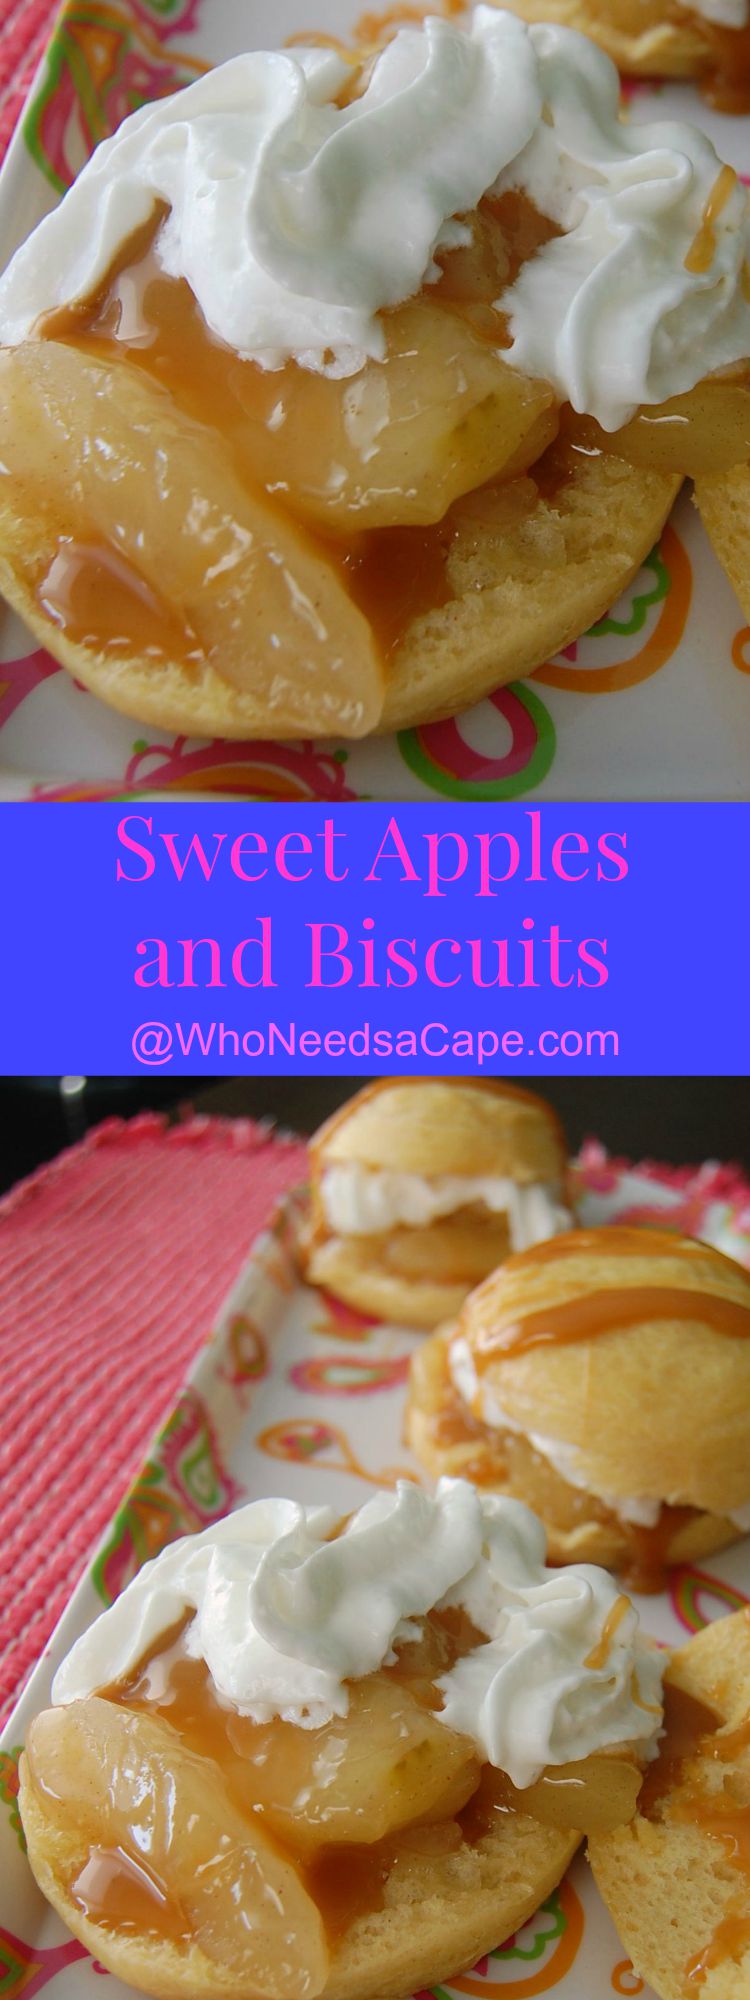 Sweet Apples and Biscuits - Who Needs A Cape?